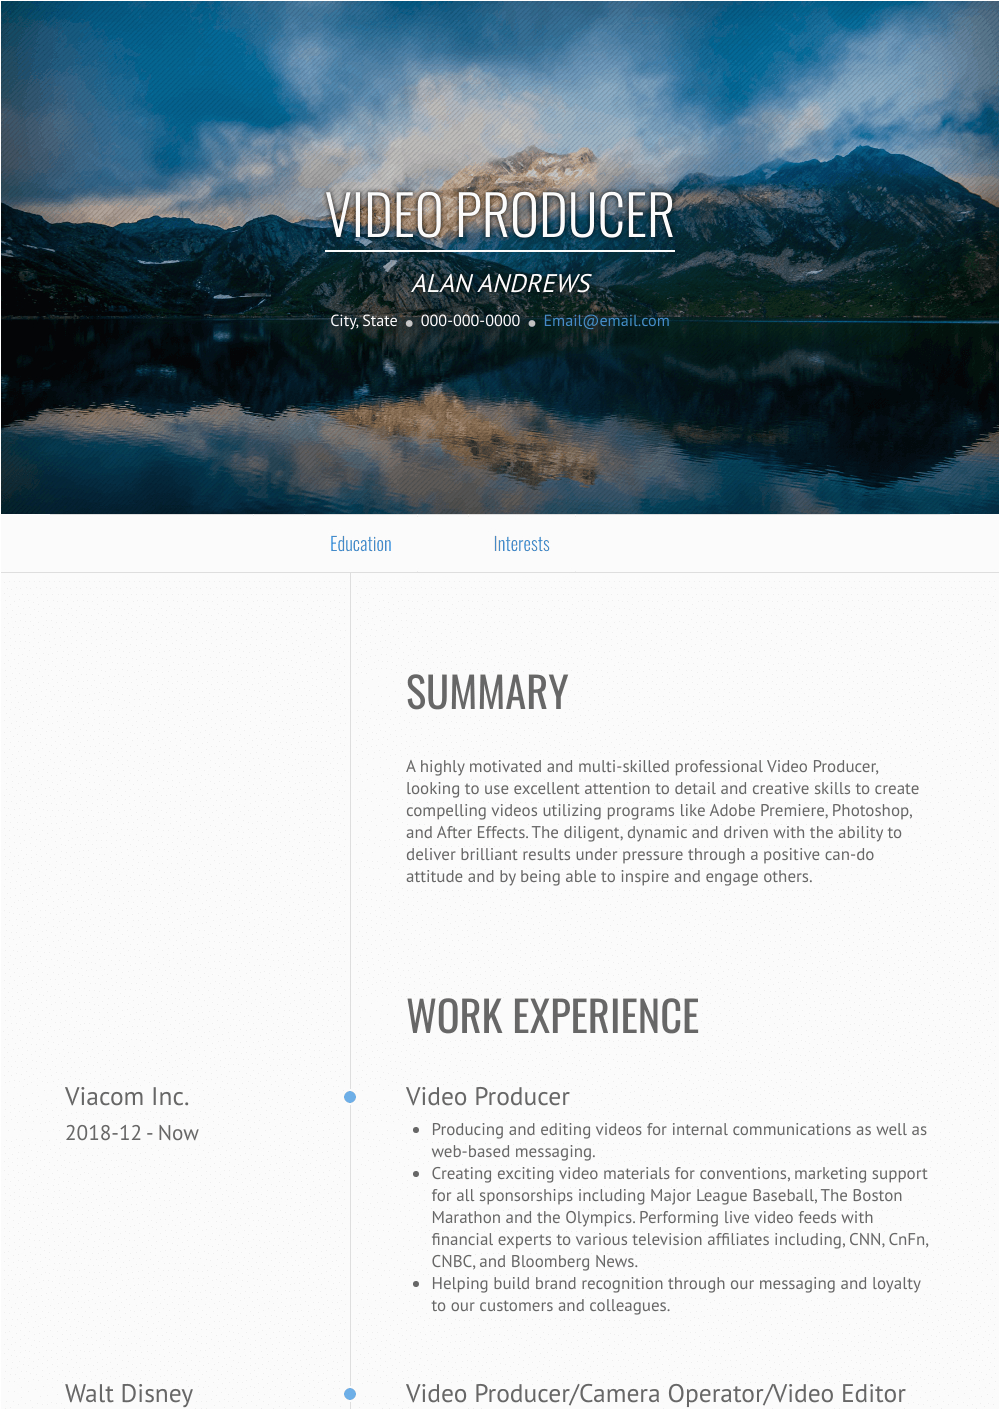 Video Production Company Business Resume Sample Video Producer Resume Samples and Templates